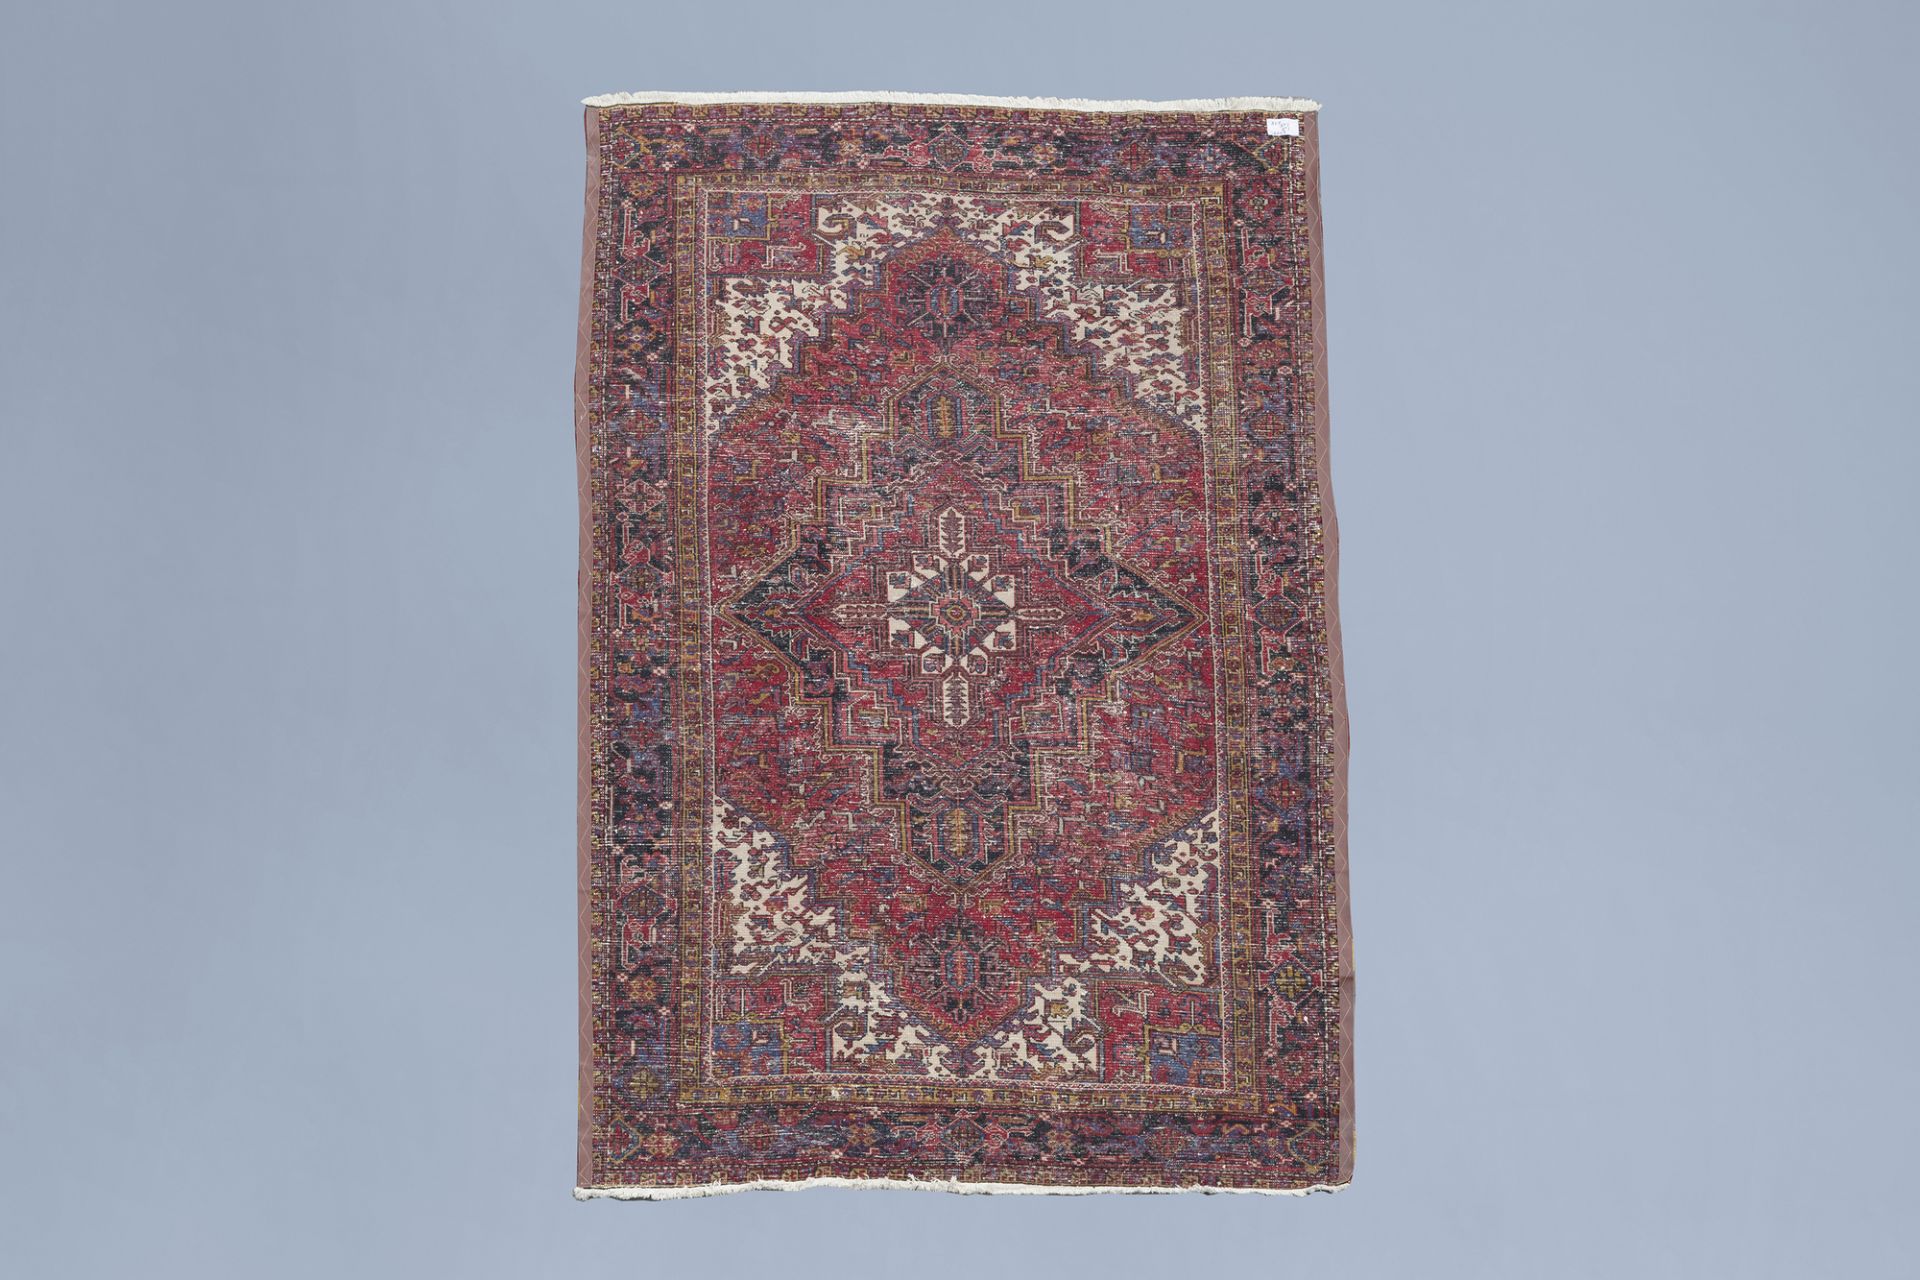 An Oriental Heriz rug with floral design, wool on cotton, Persia, mid 20th C. - Image 2 of 3